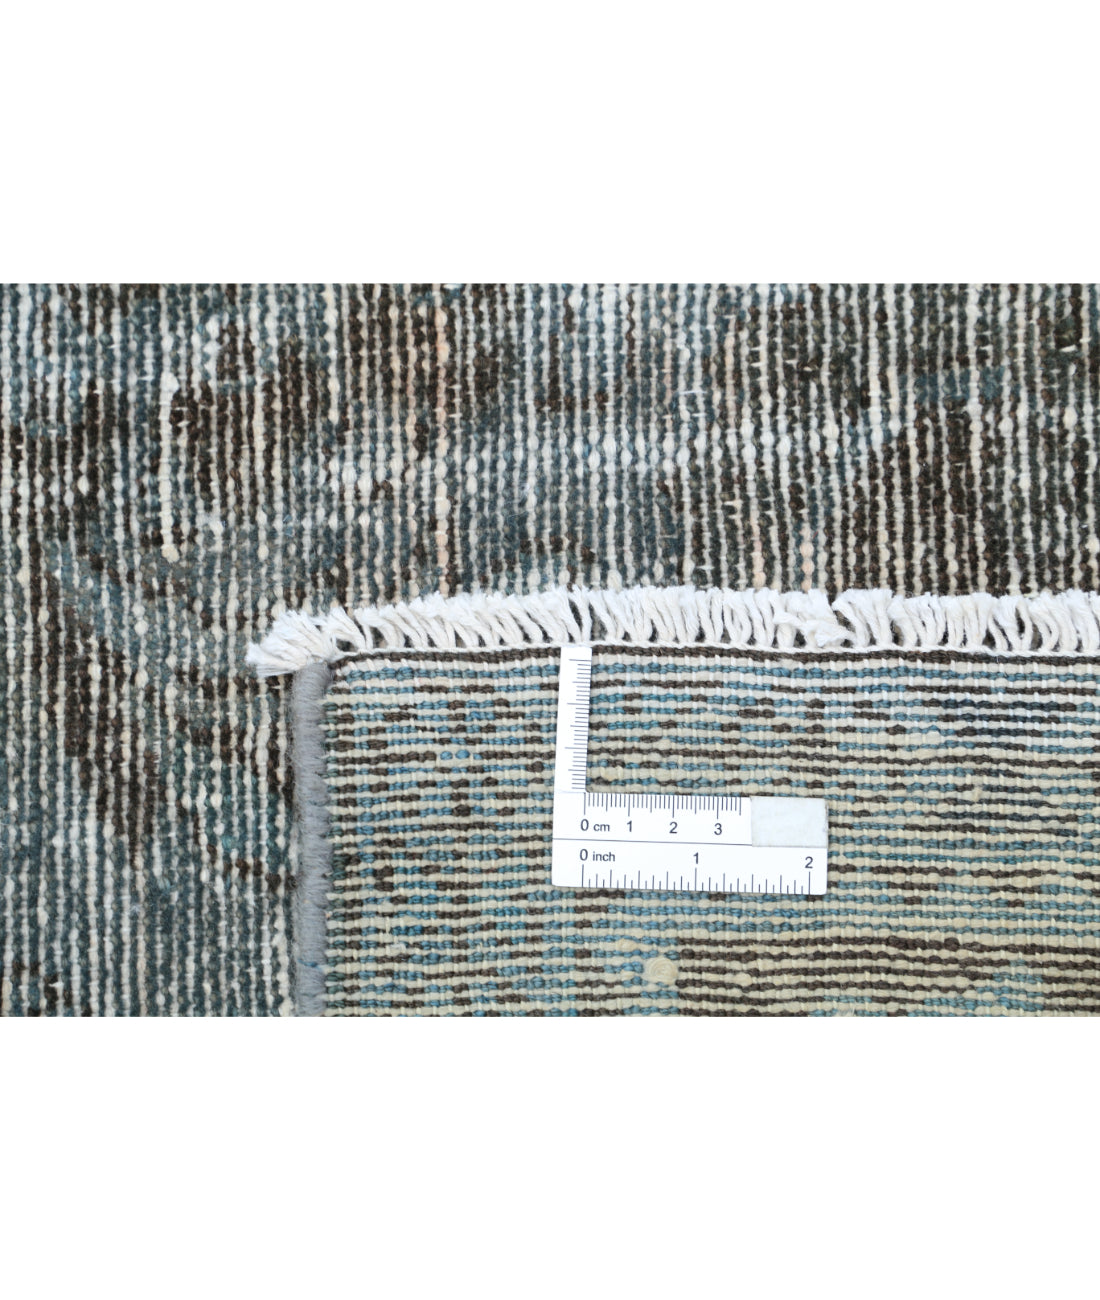 Hand Knotted Vintage Distressed Persian Kashan Wool Rug - 7'3'' x 11'2'' 7'3'' x 11'2'' (218 X 335) / Blue / Charcoal